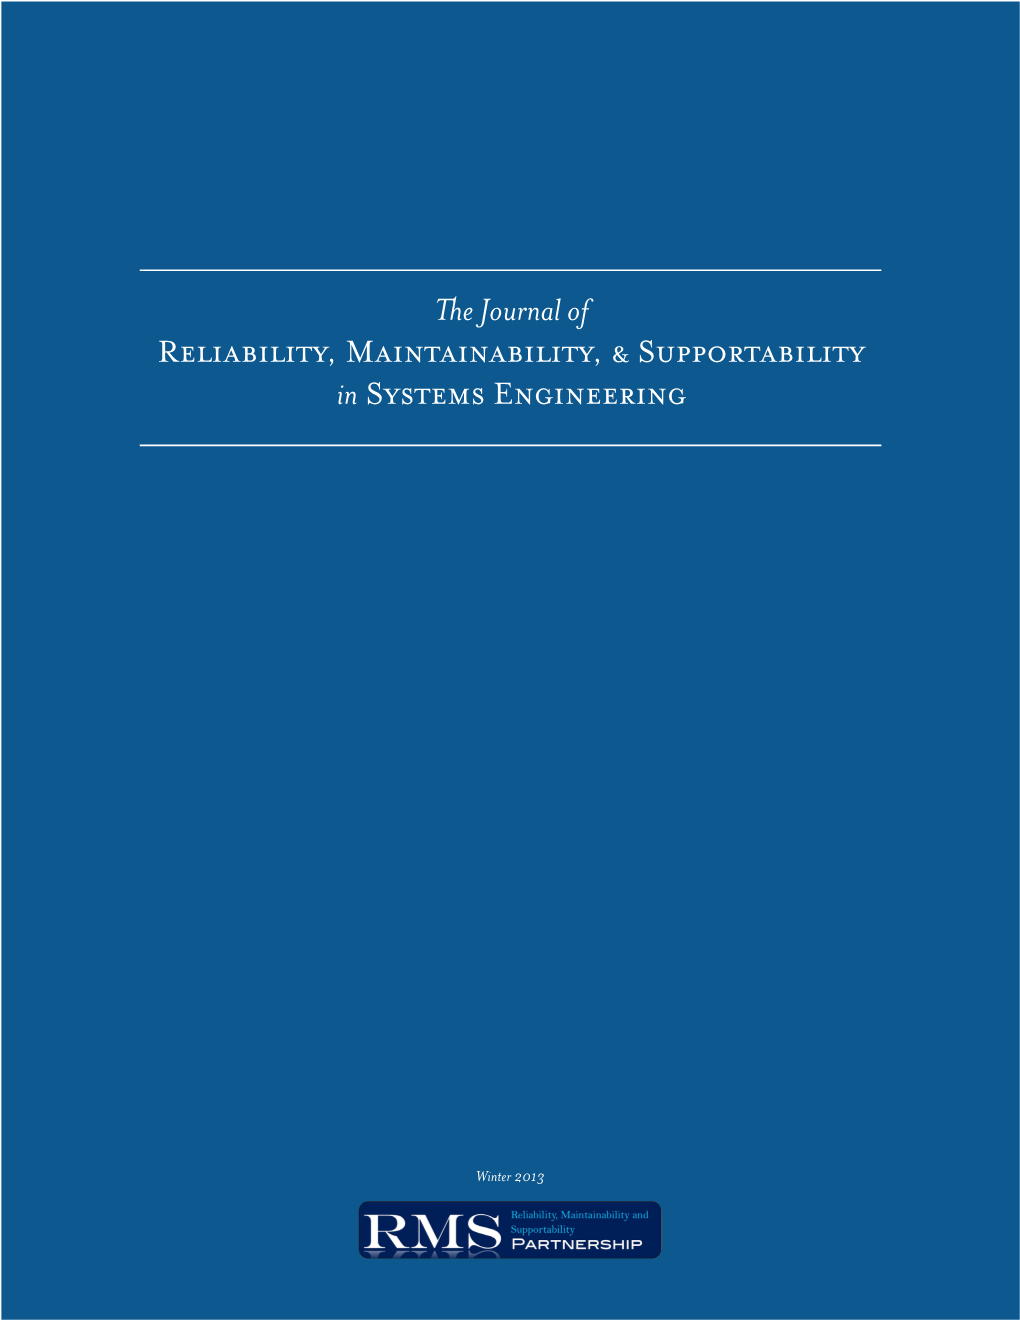 The Journal of Reliability, Maintainability, & Supportability In